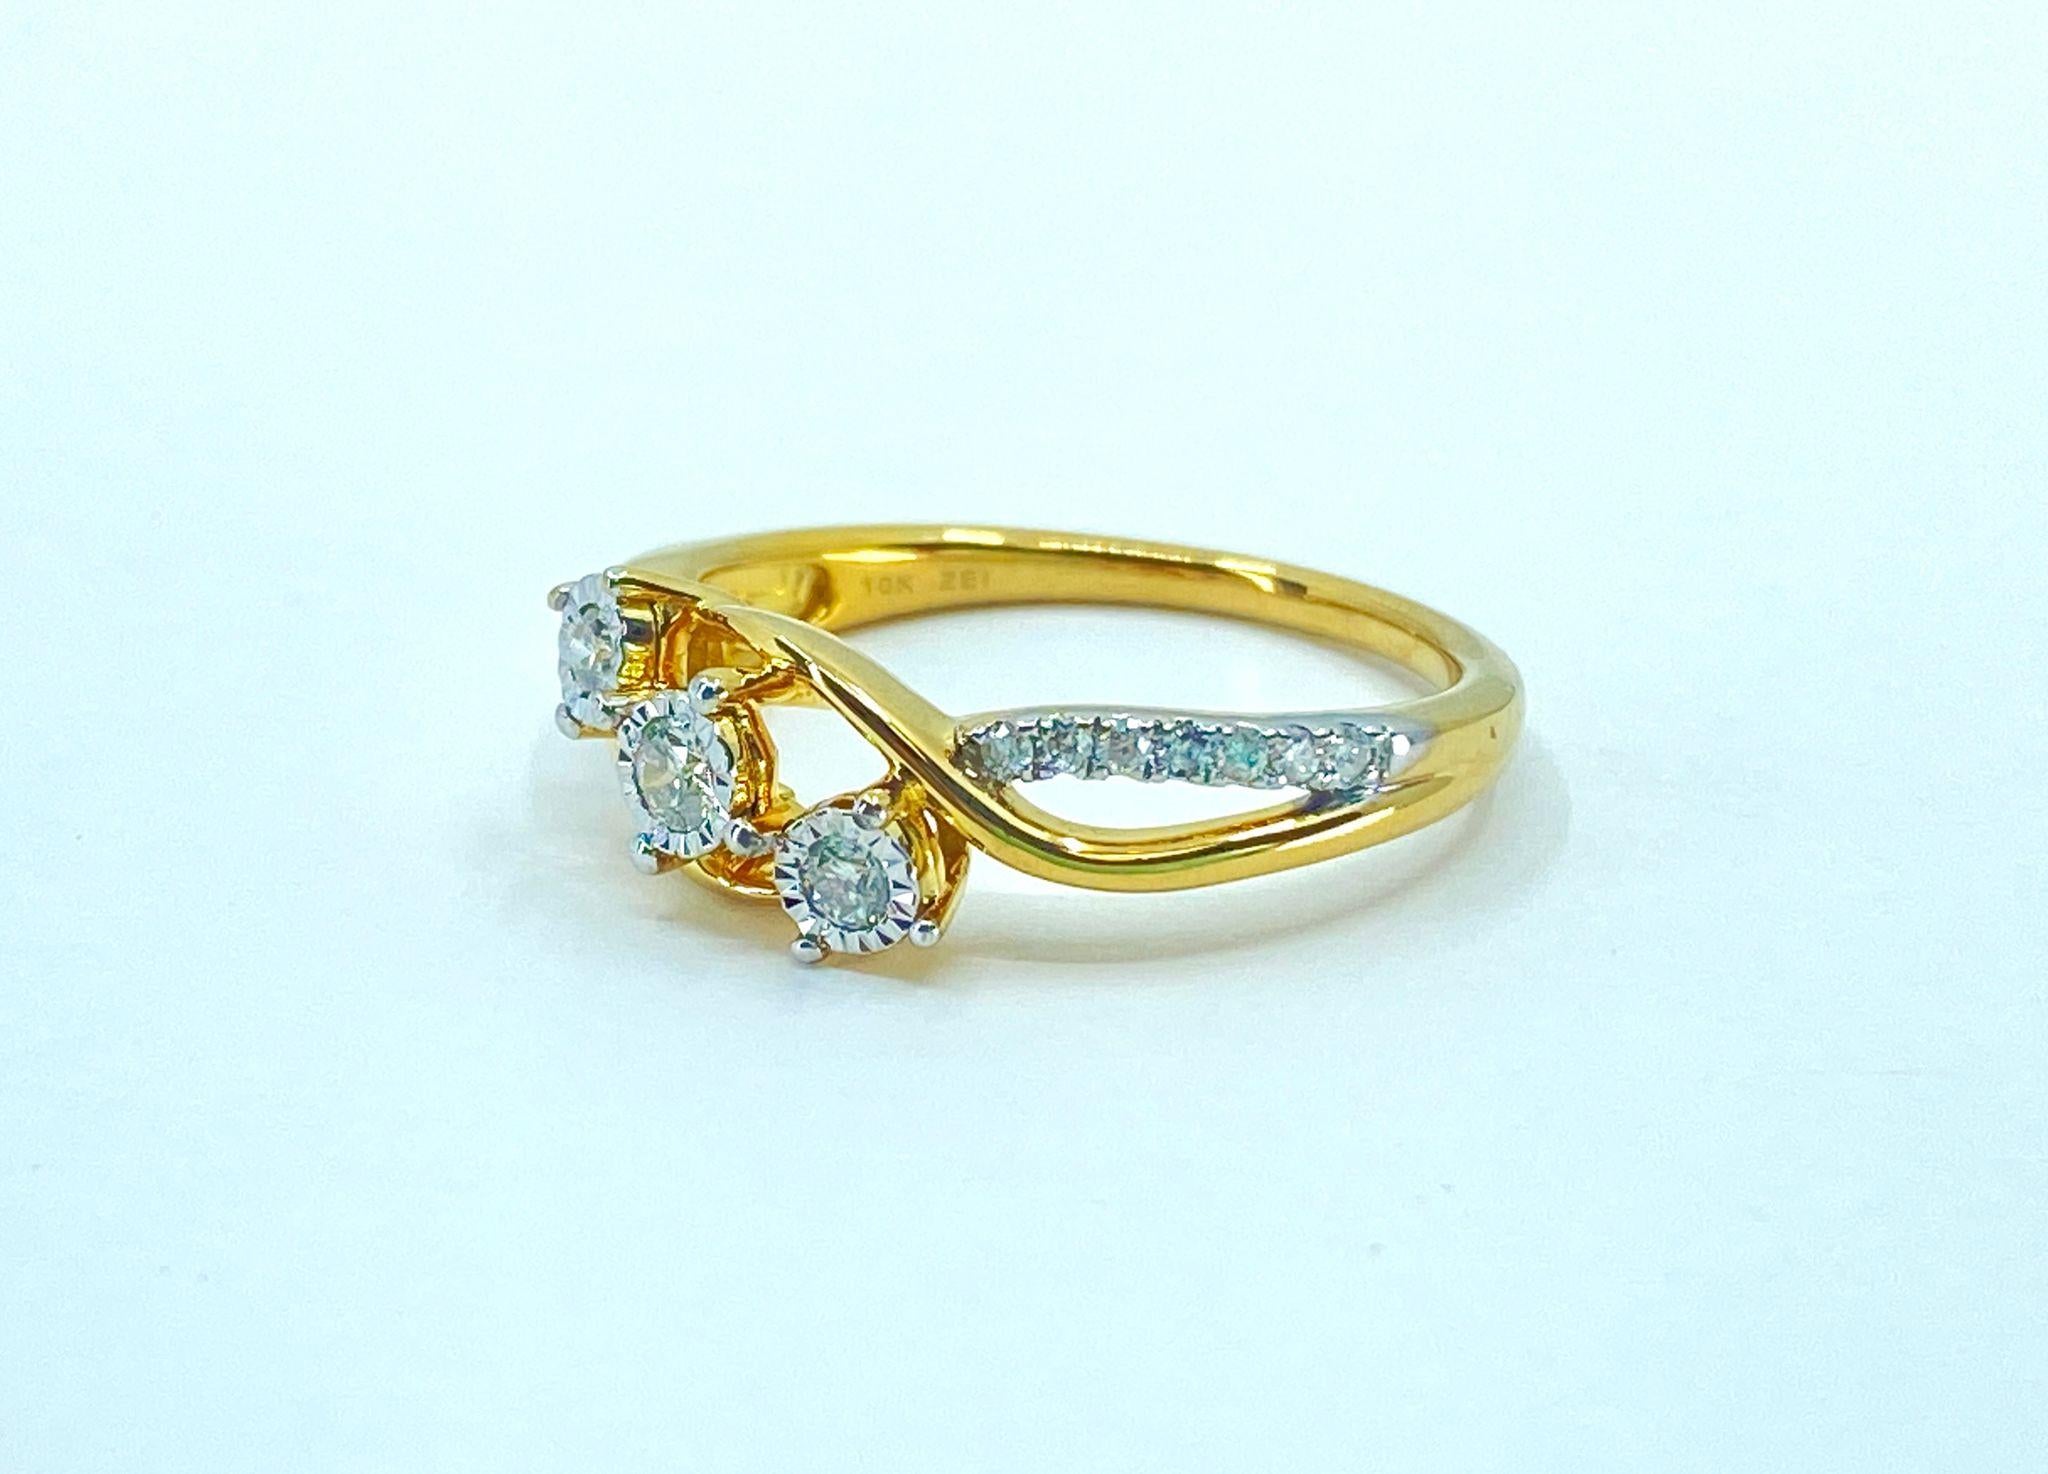 Fashioned from radiant 14k yellow gold, this classic Victorian-era ring features a total of 0.50 carats of round brilliant-cut diamonds. The diamonds boast VS clarity and G color, adding brilliance to the elegant design. With a timeless appeal, this